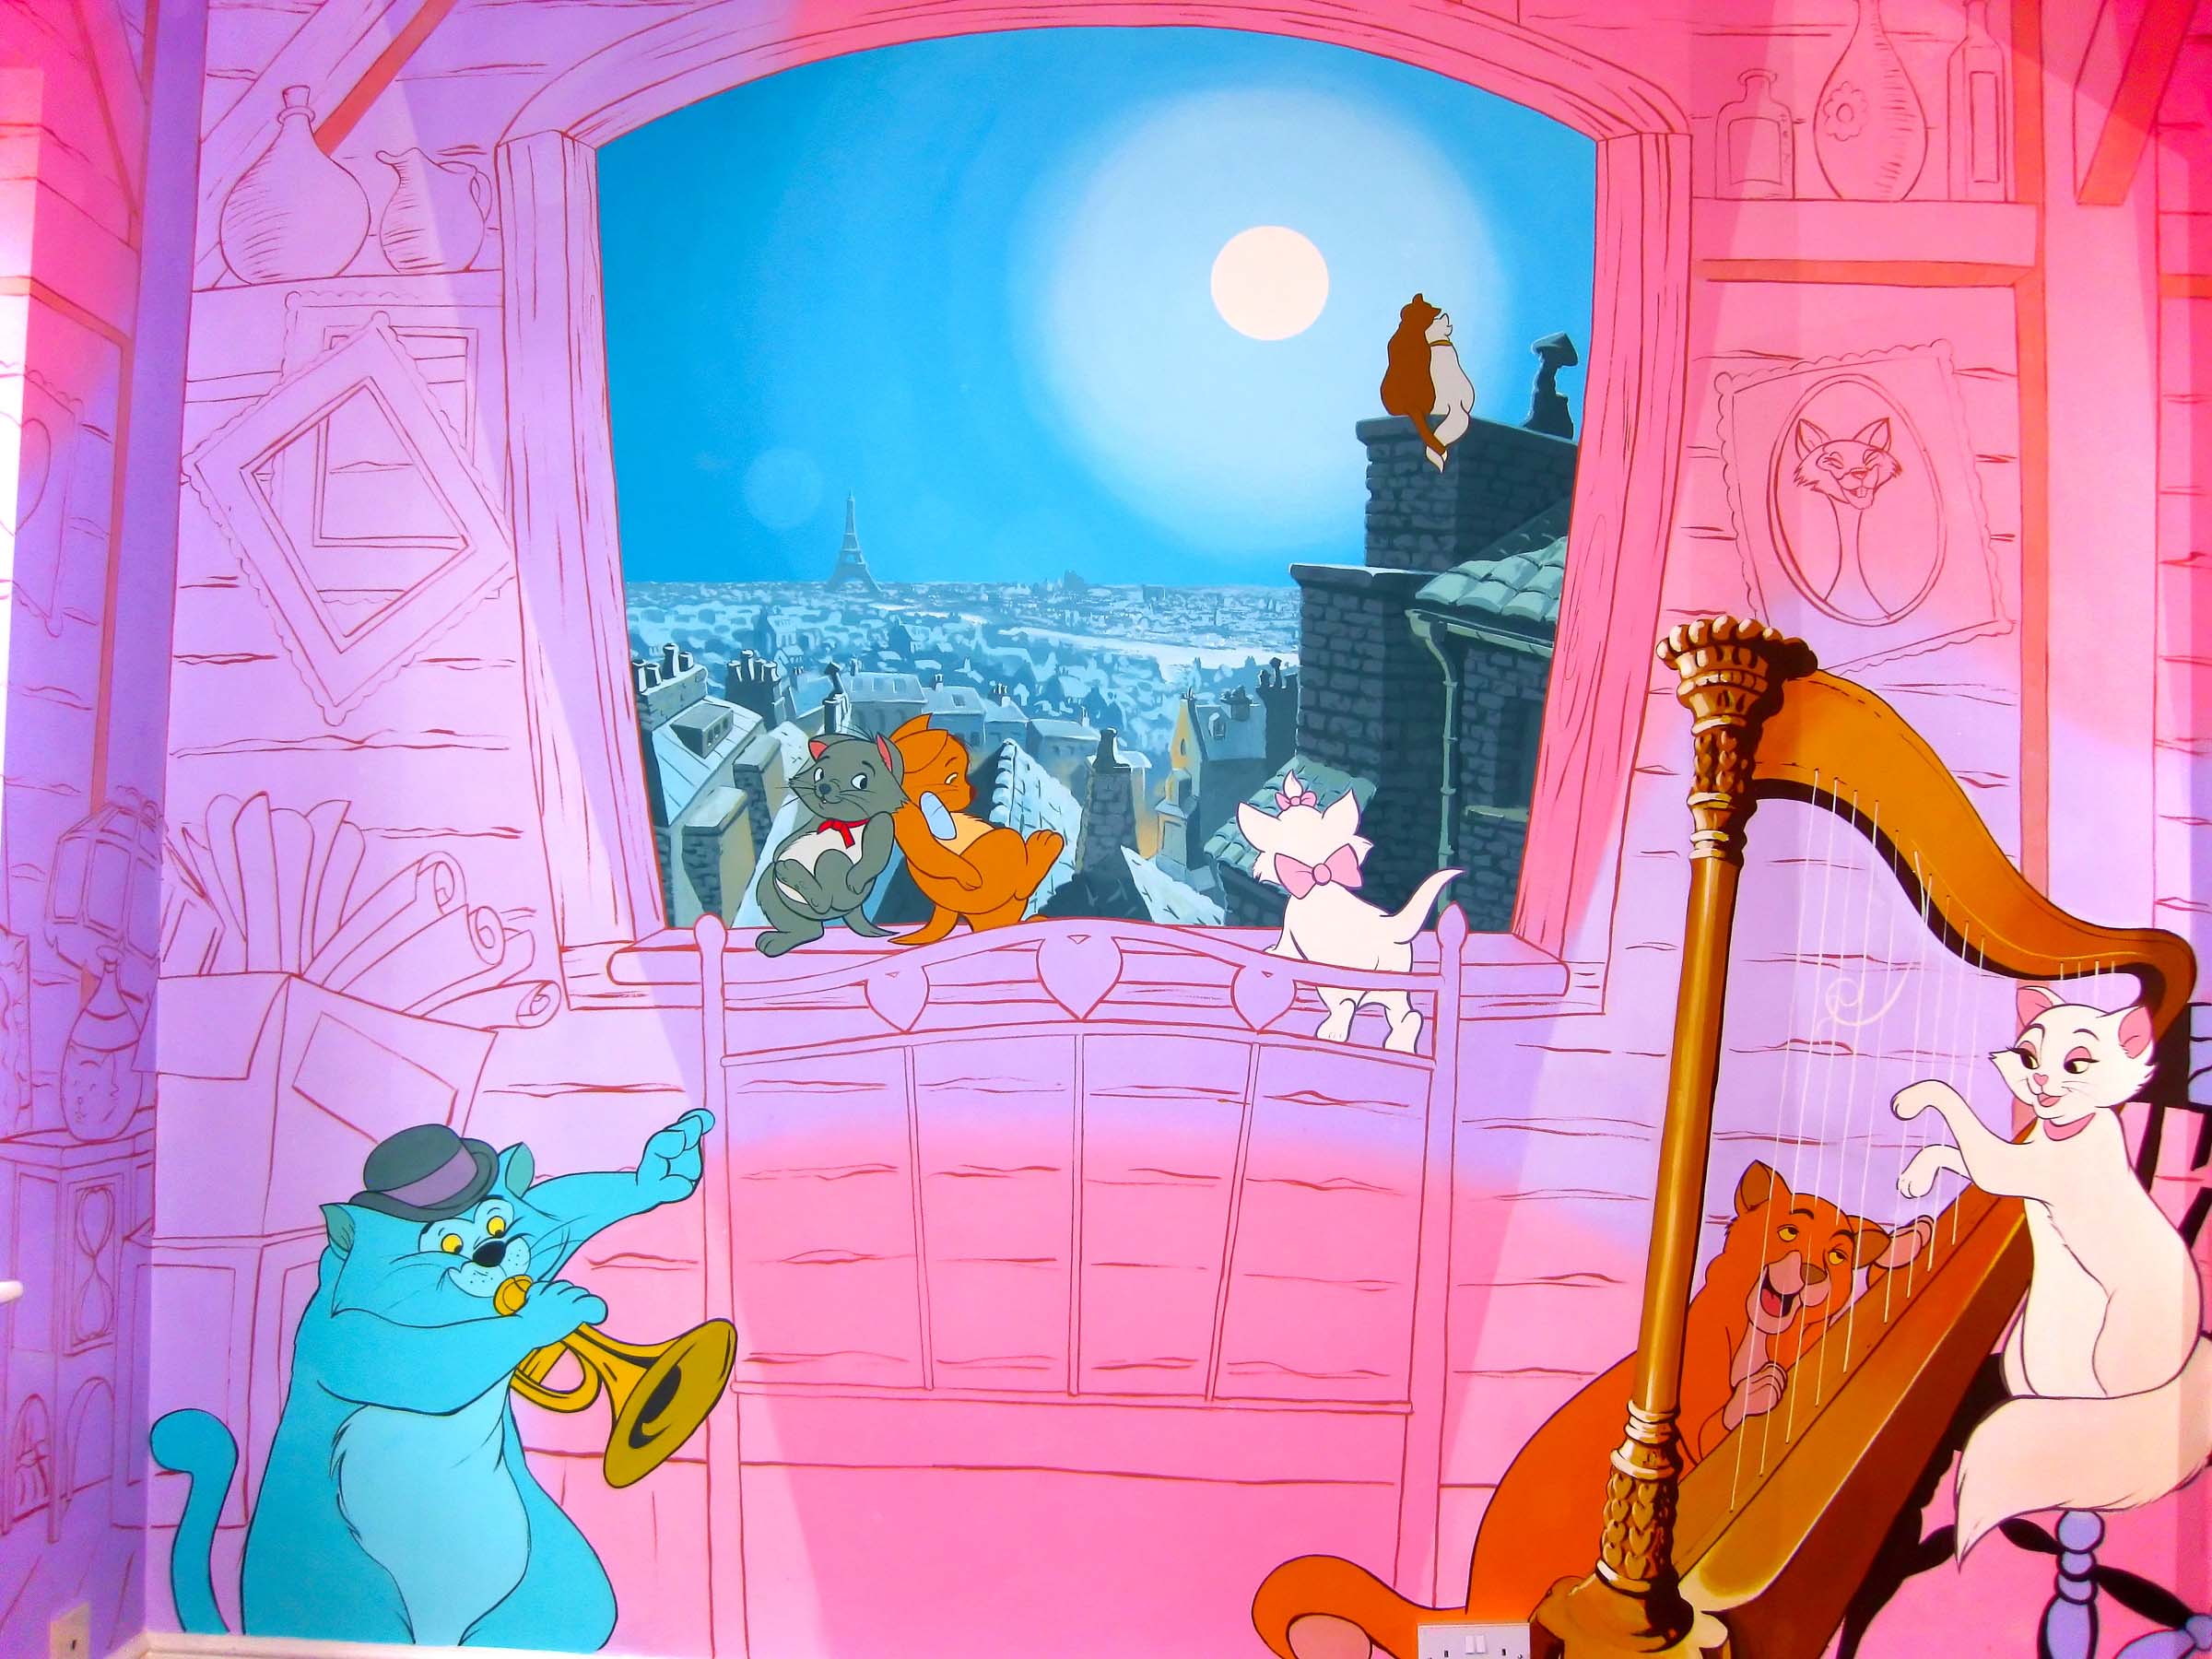 Disney Murals for Girls, withBerlioz, Toulouse and Marie shaking it up in front of Paris by moonlight, utterly charming